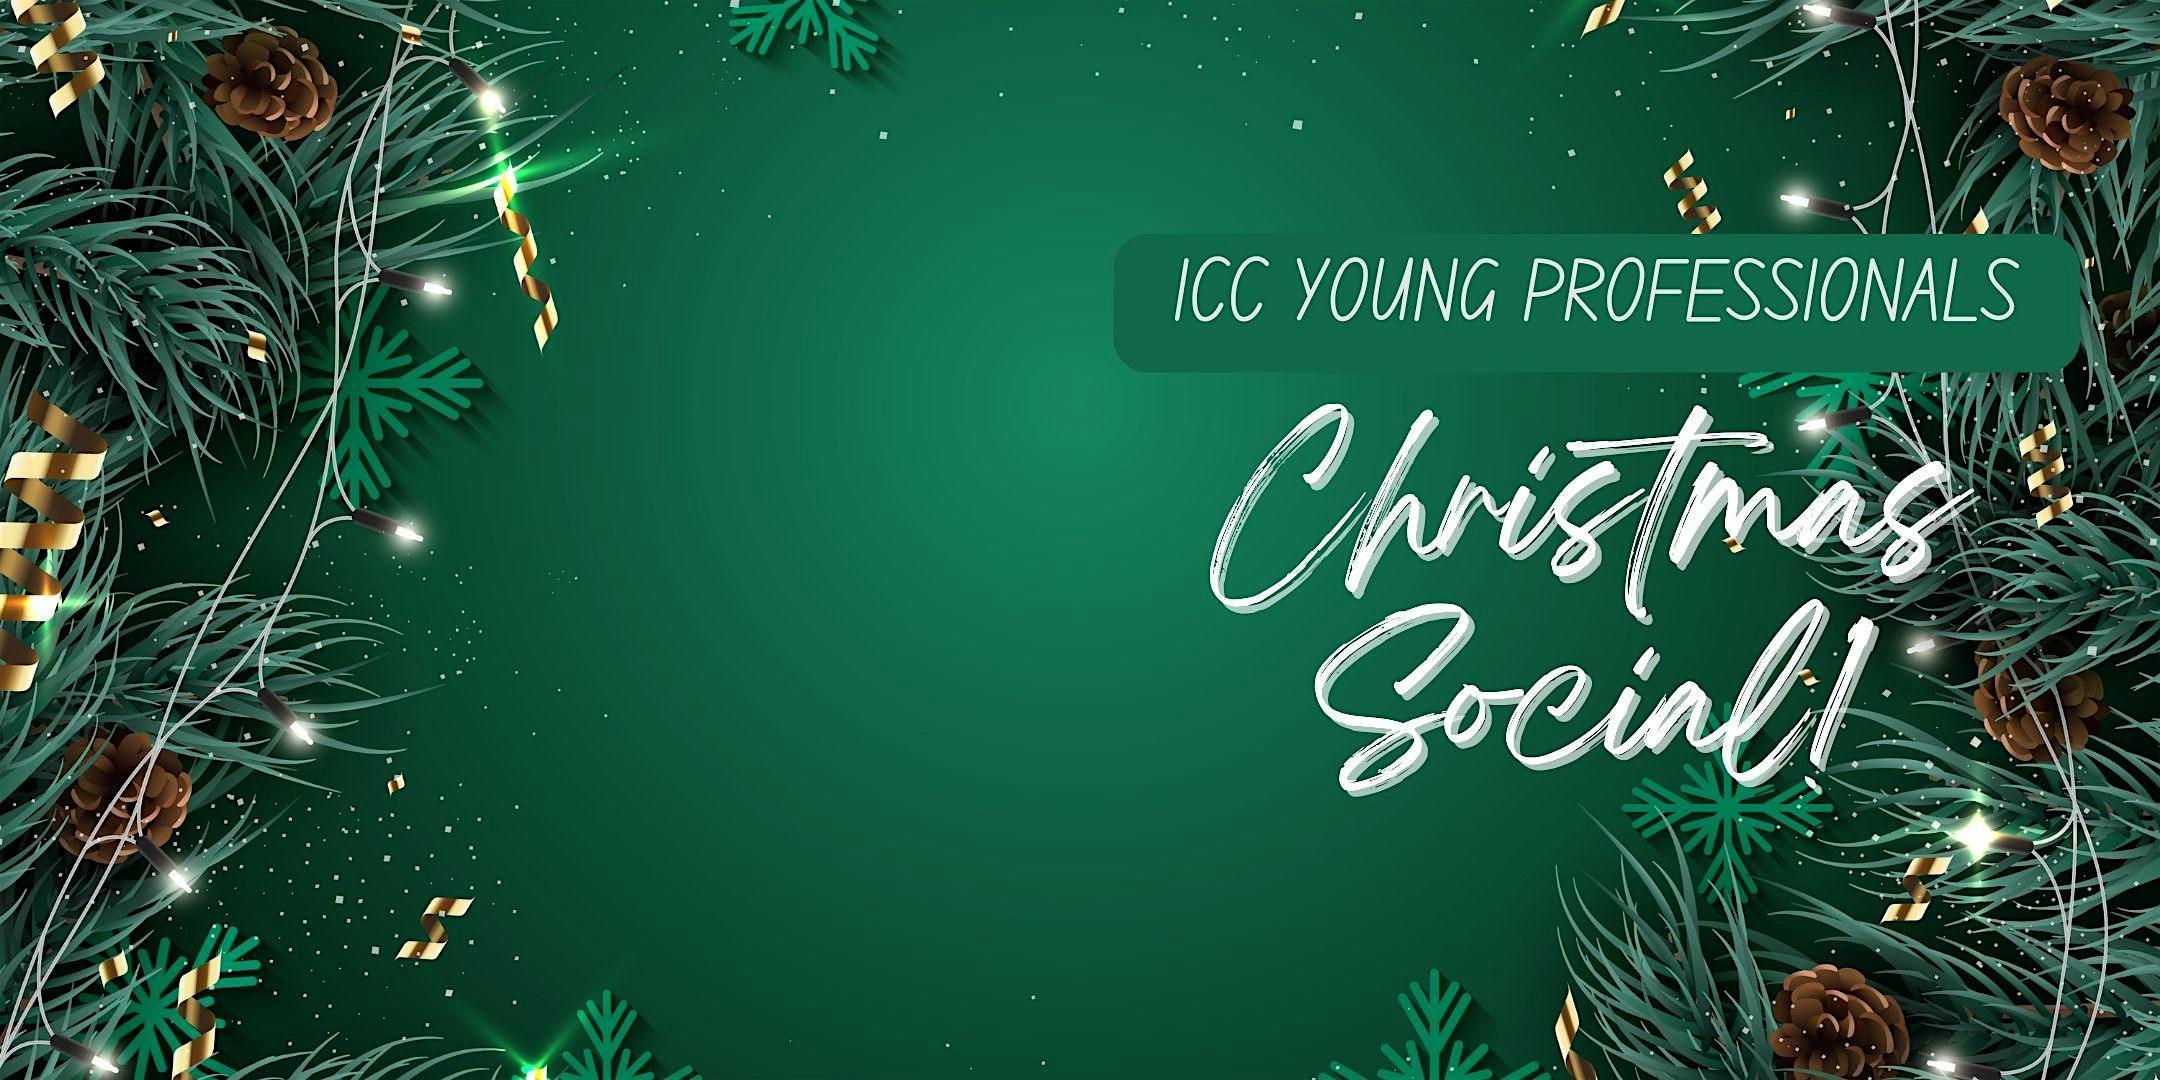 The ICC Young Professionals Christmas Social!